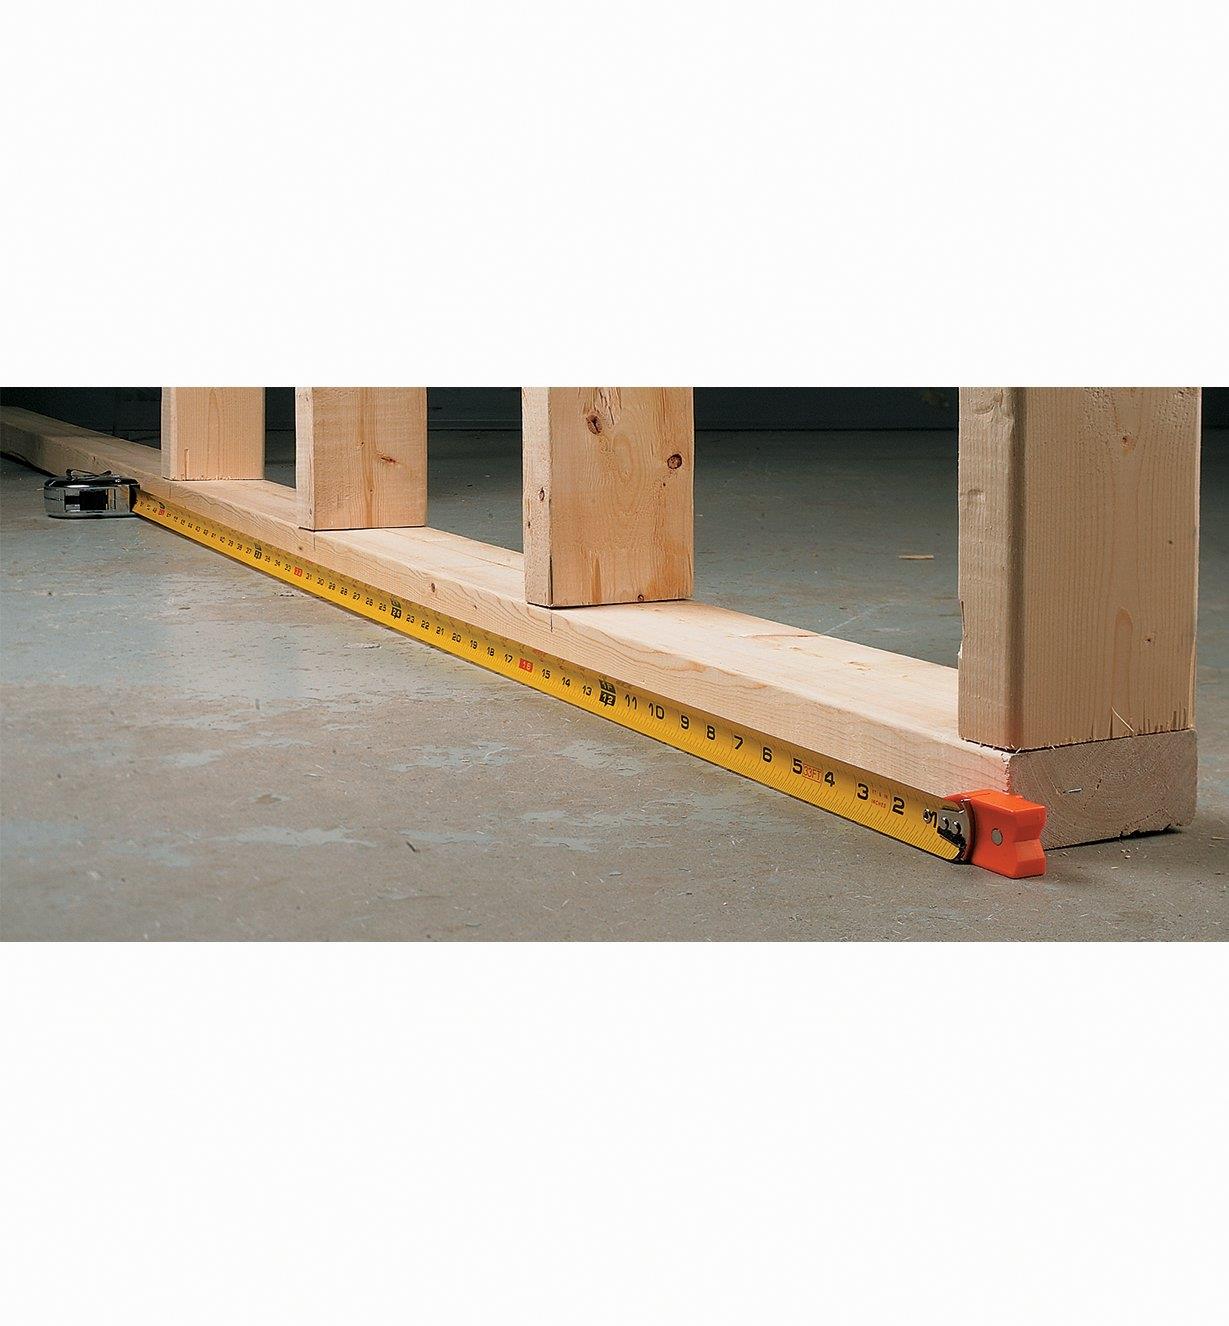 Measuring wooden framing with a tape measure and tape tip